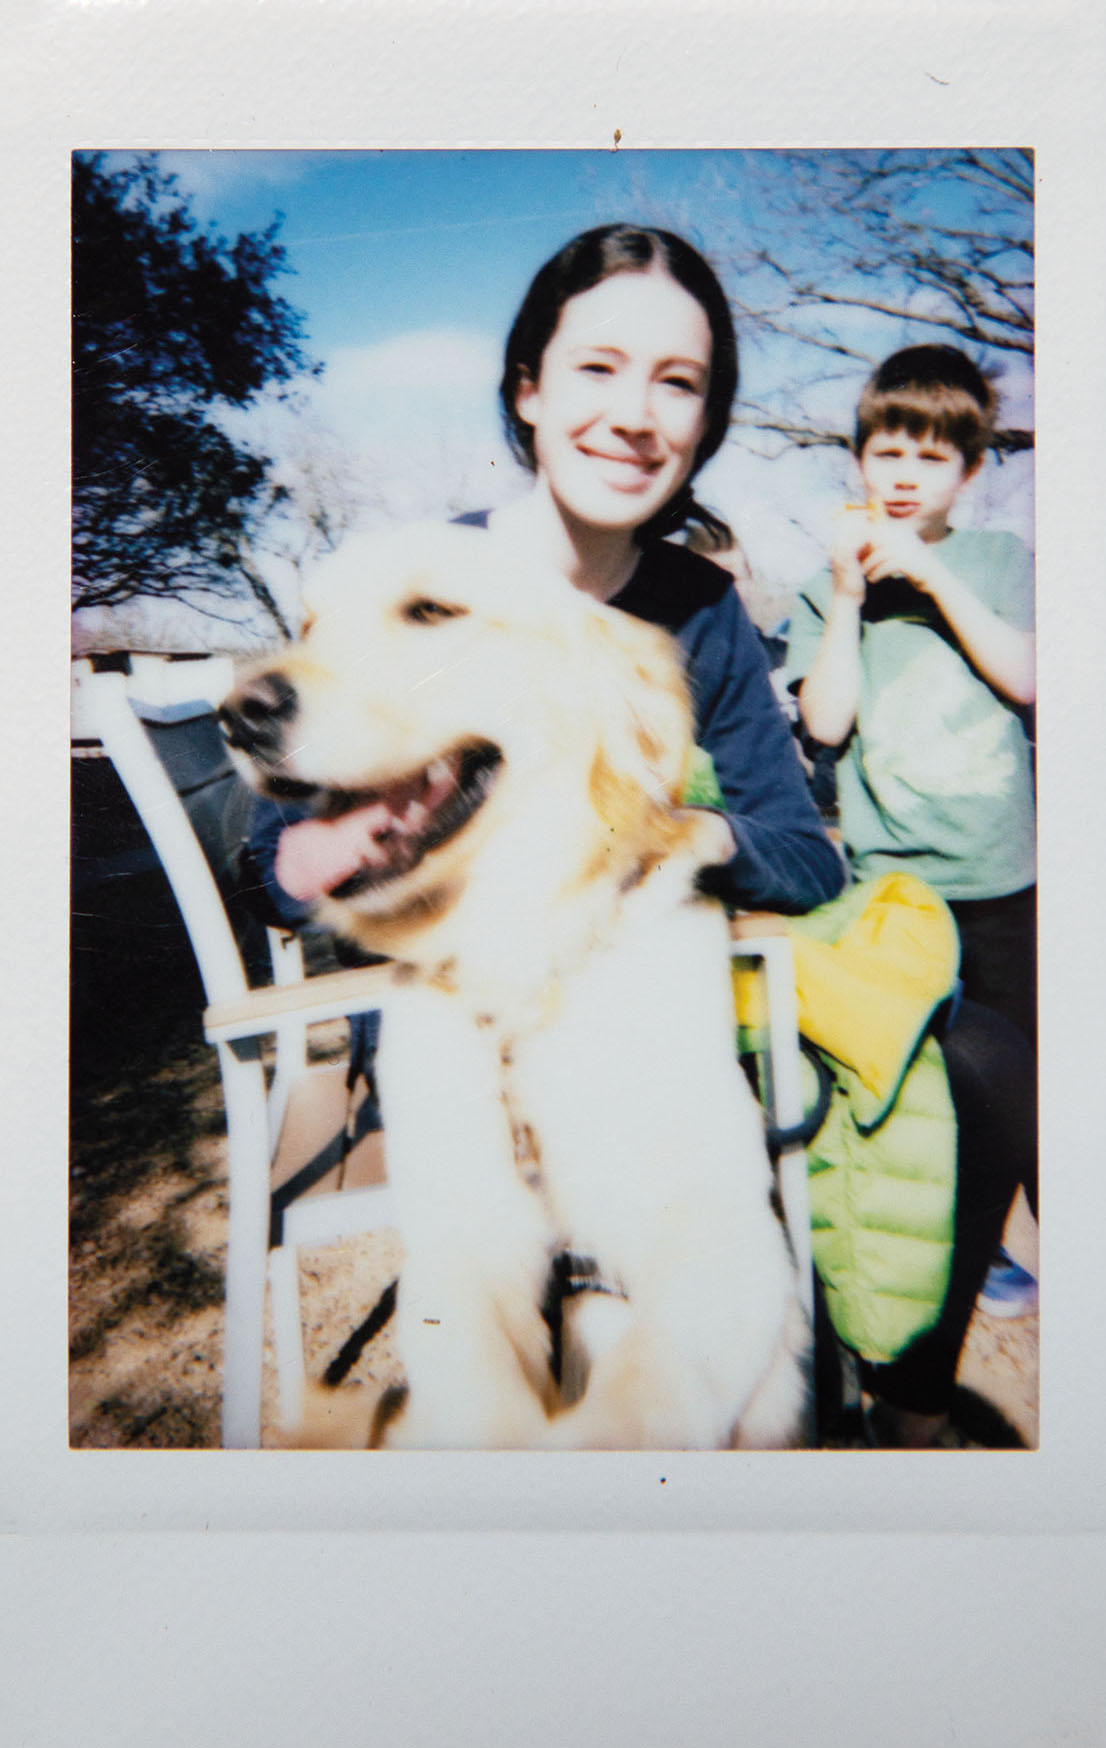 A Polaroid style picture of a young woman and a dog